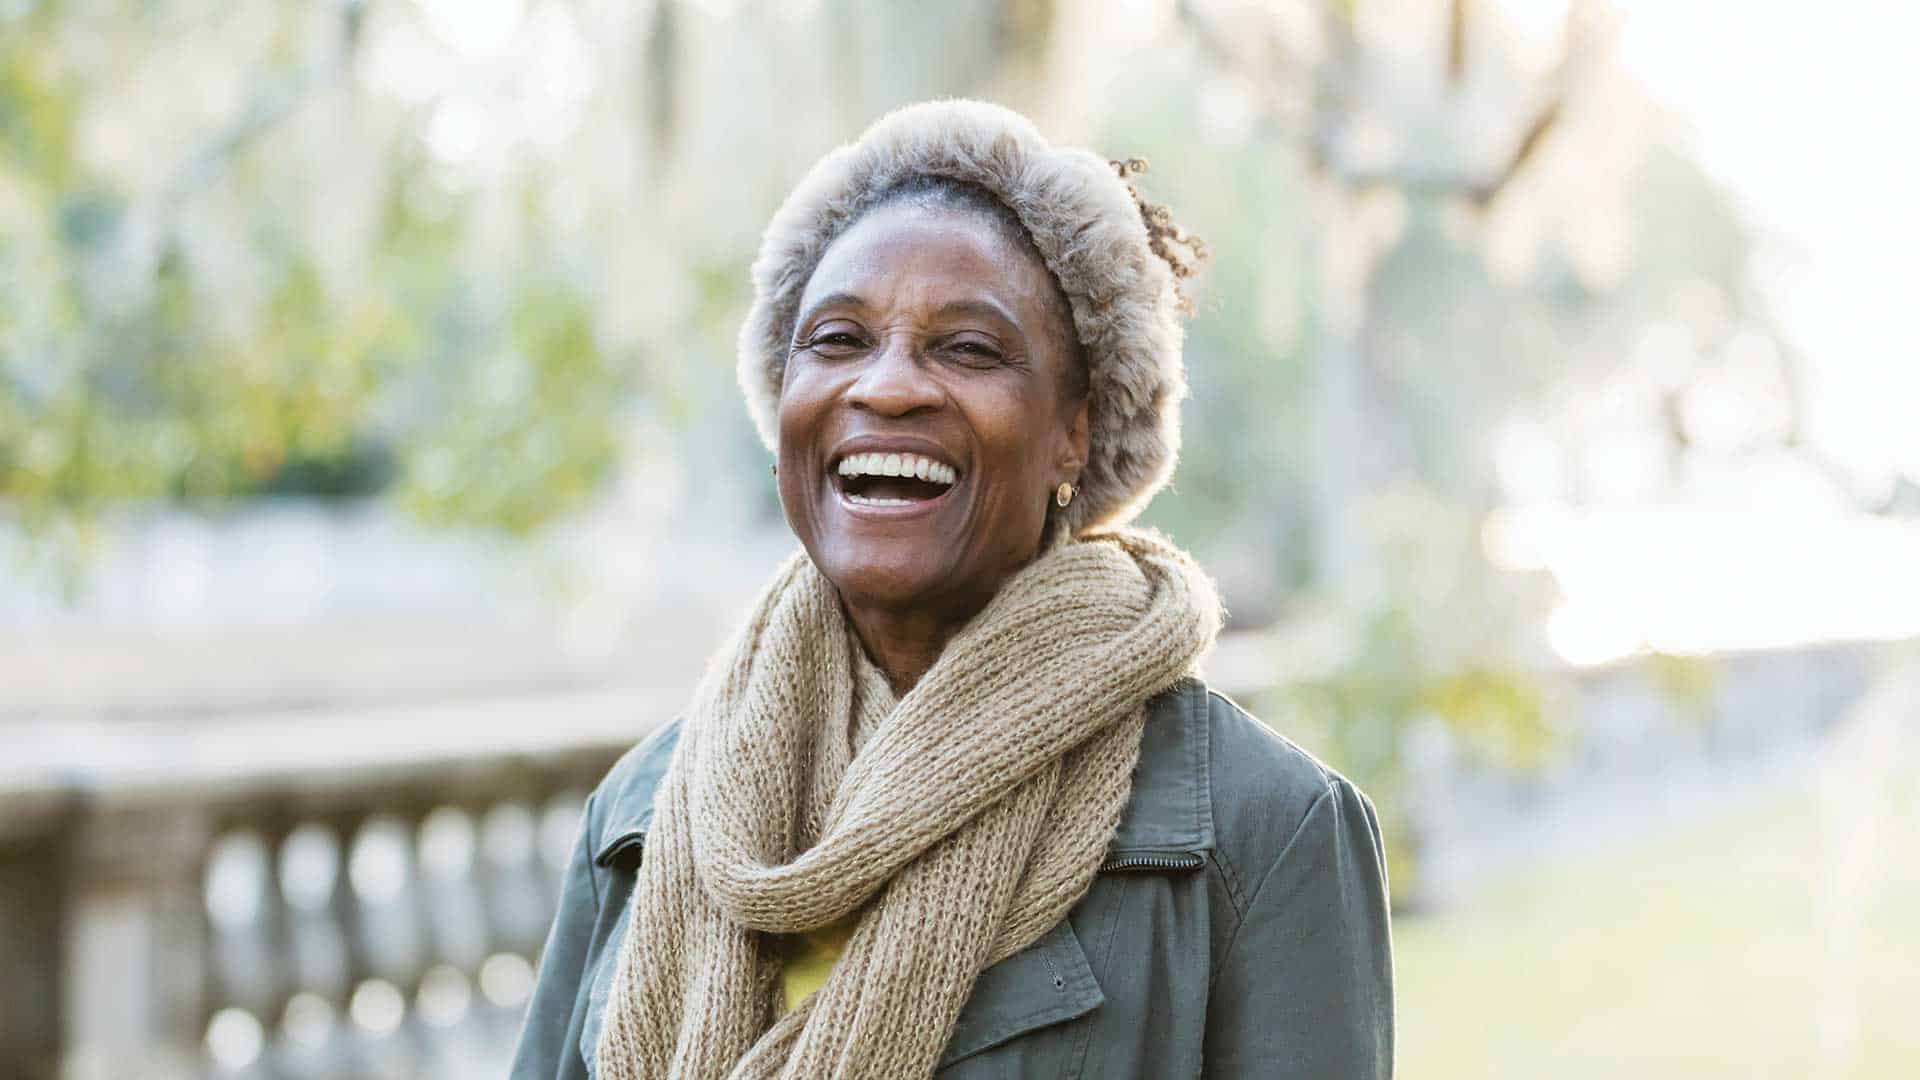 Elderly woman laughing in the park.